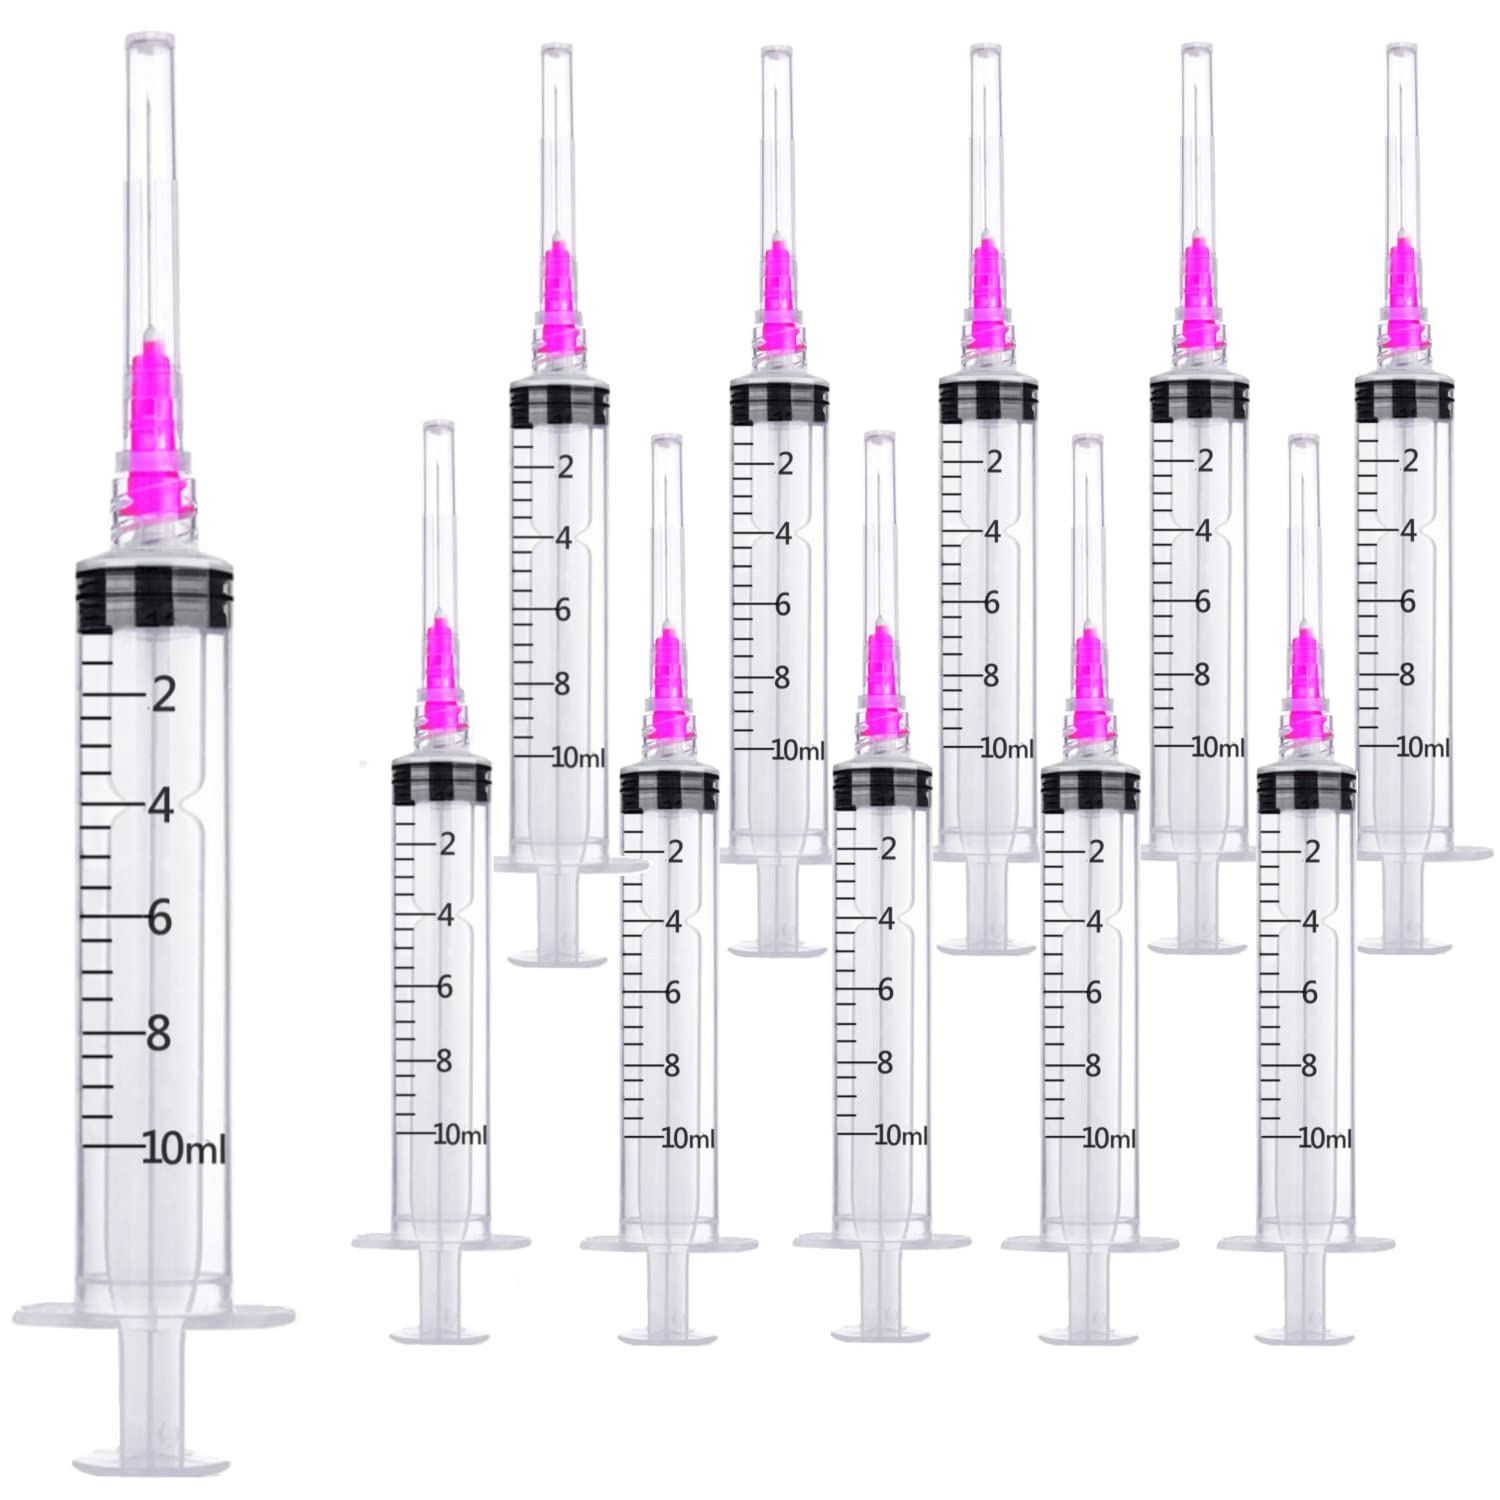 15 Pack 10ml 18Ga Plastic Syringe with Measurement for Scientific Labs and Industrial Dispensing, Disposable Individually Wrapped (15, 10ml-18Ga)